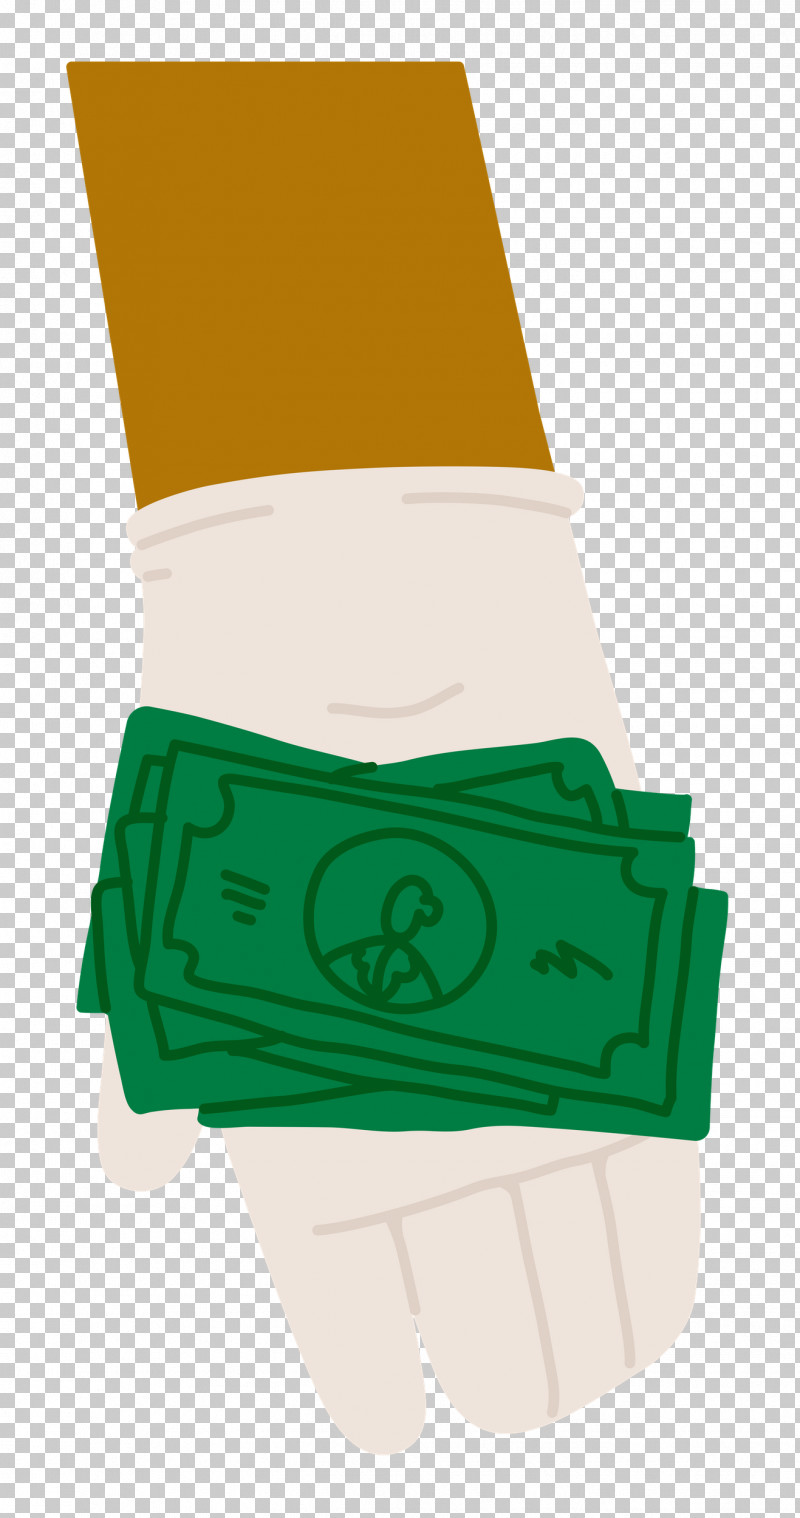 Hand Giving Cash PNG, Clipart, Cartoon, Green, Meter Free PNG Download